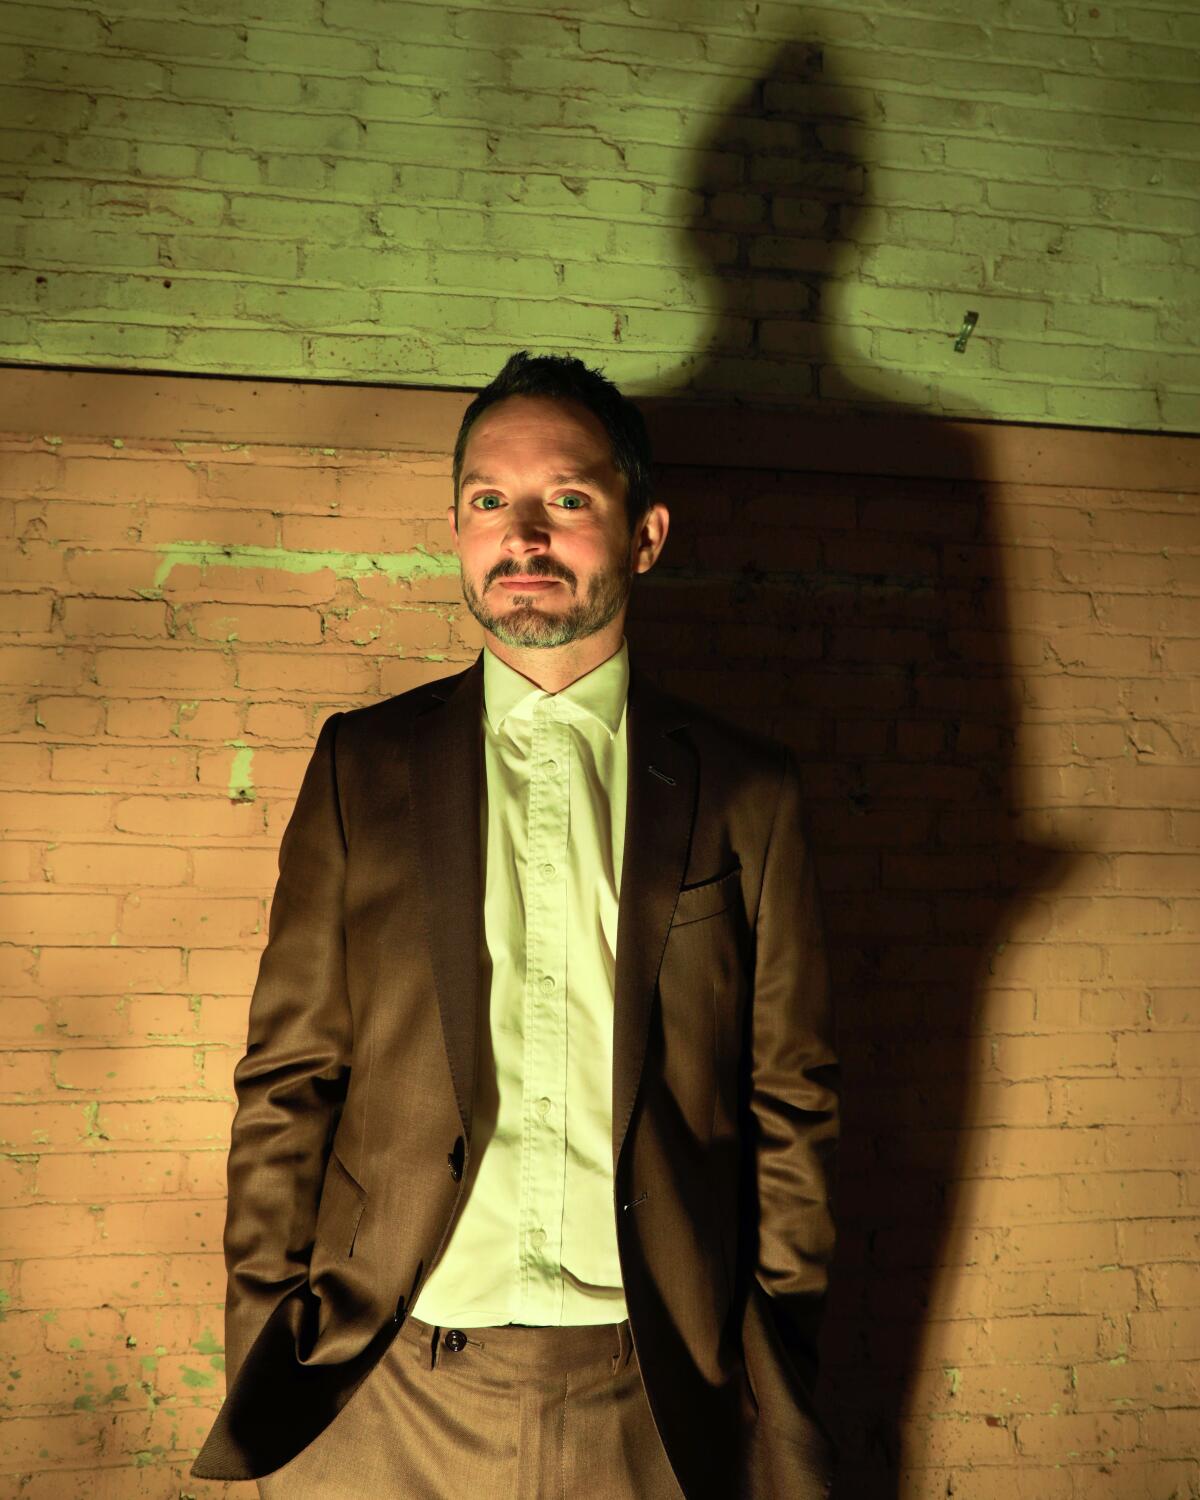 Elijah Wood, wearing a brown suit, stands against a brick wall.